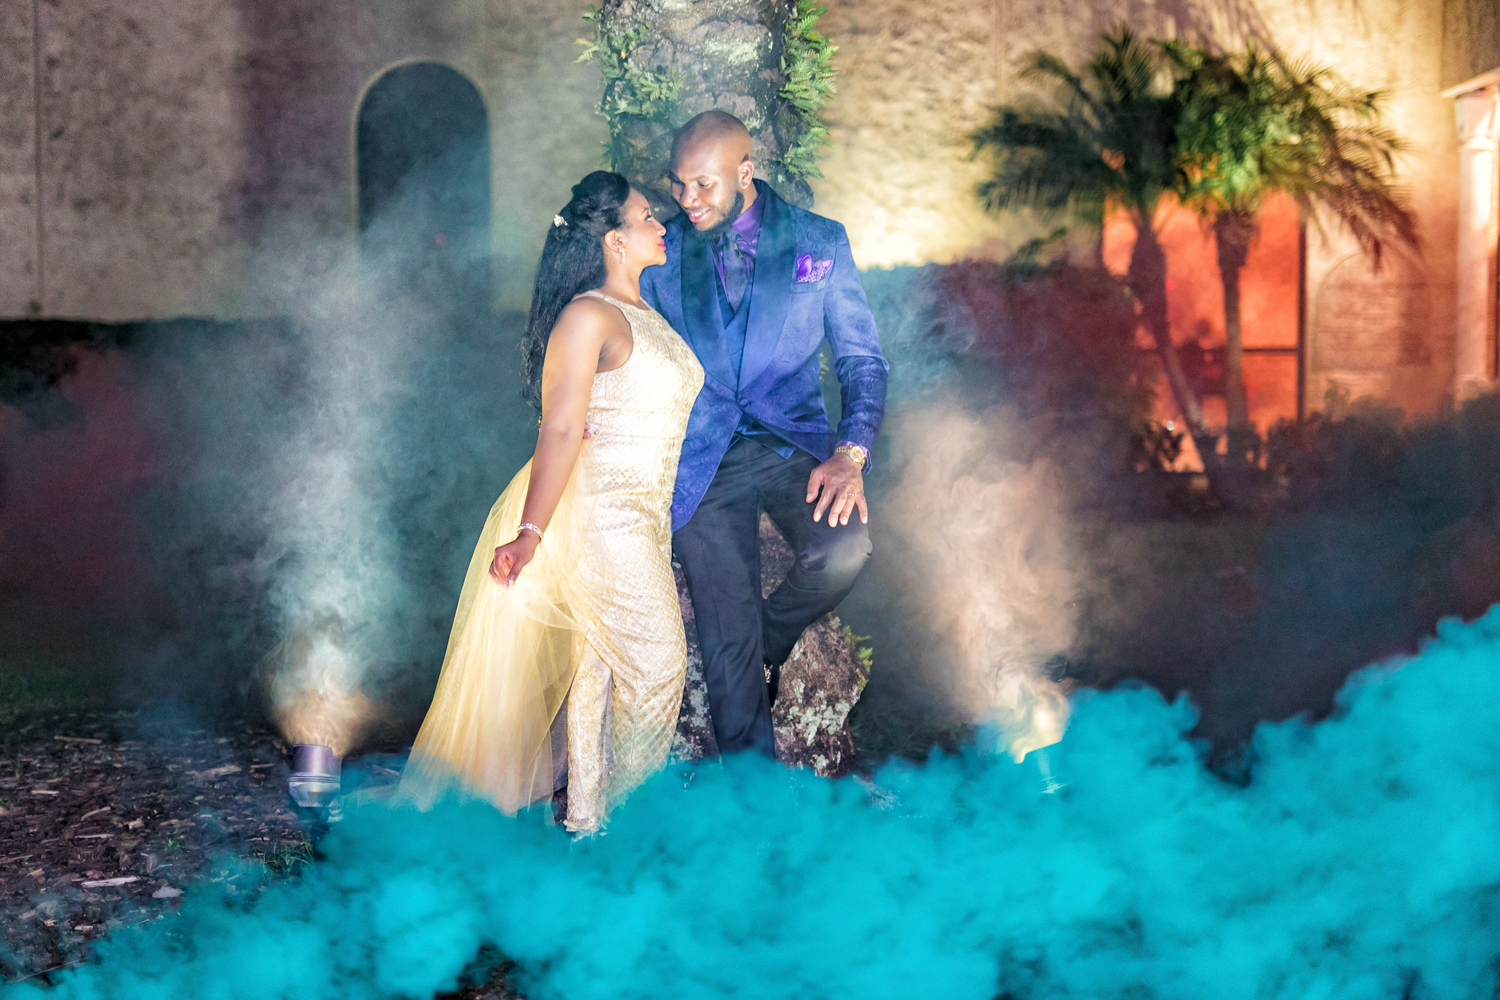 Smoke bomb picture of a bride and groom on their wedding day.